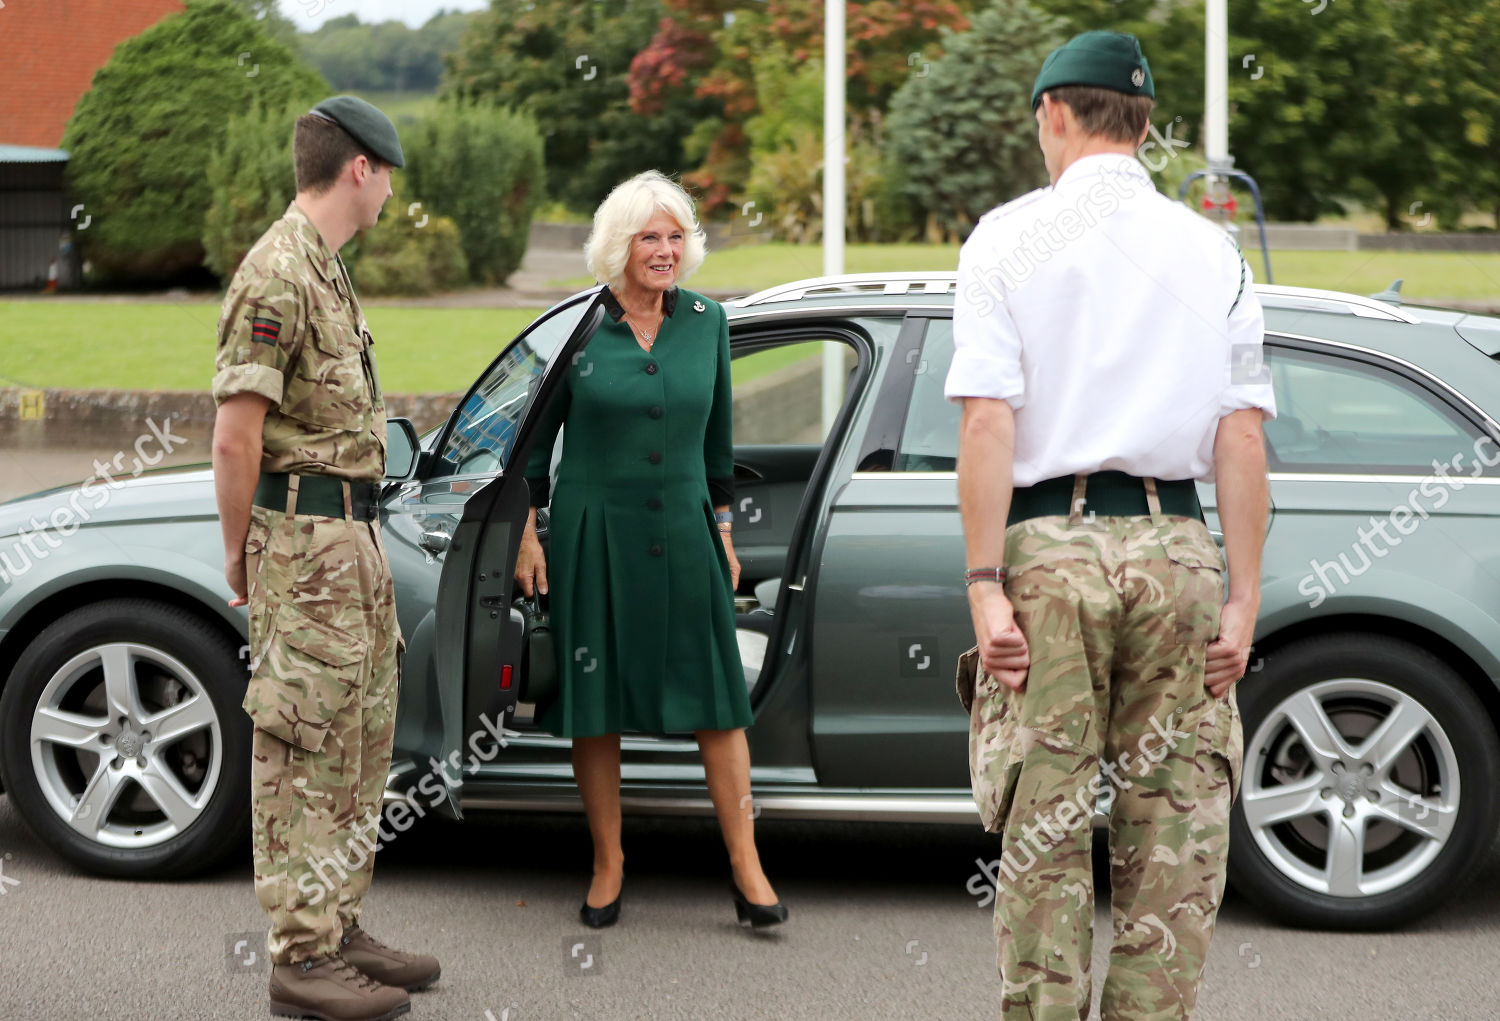 CASA REAL BRITÁNICA - Página 87 The-duchess-of-cornwall-visits-1st-battalion-the-rifles-beachley-barracks-chepstow-wales-shutterstock-editorial-10768638a